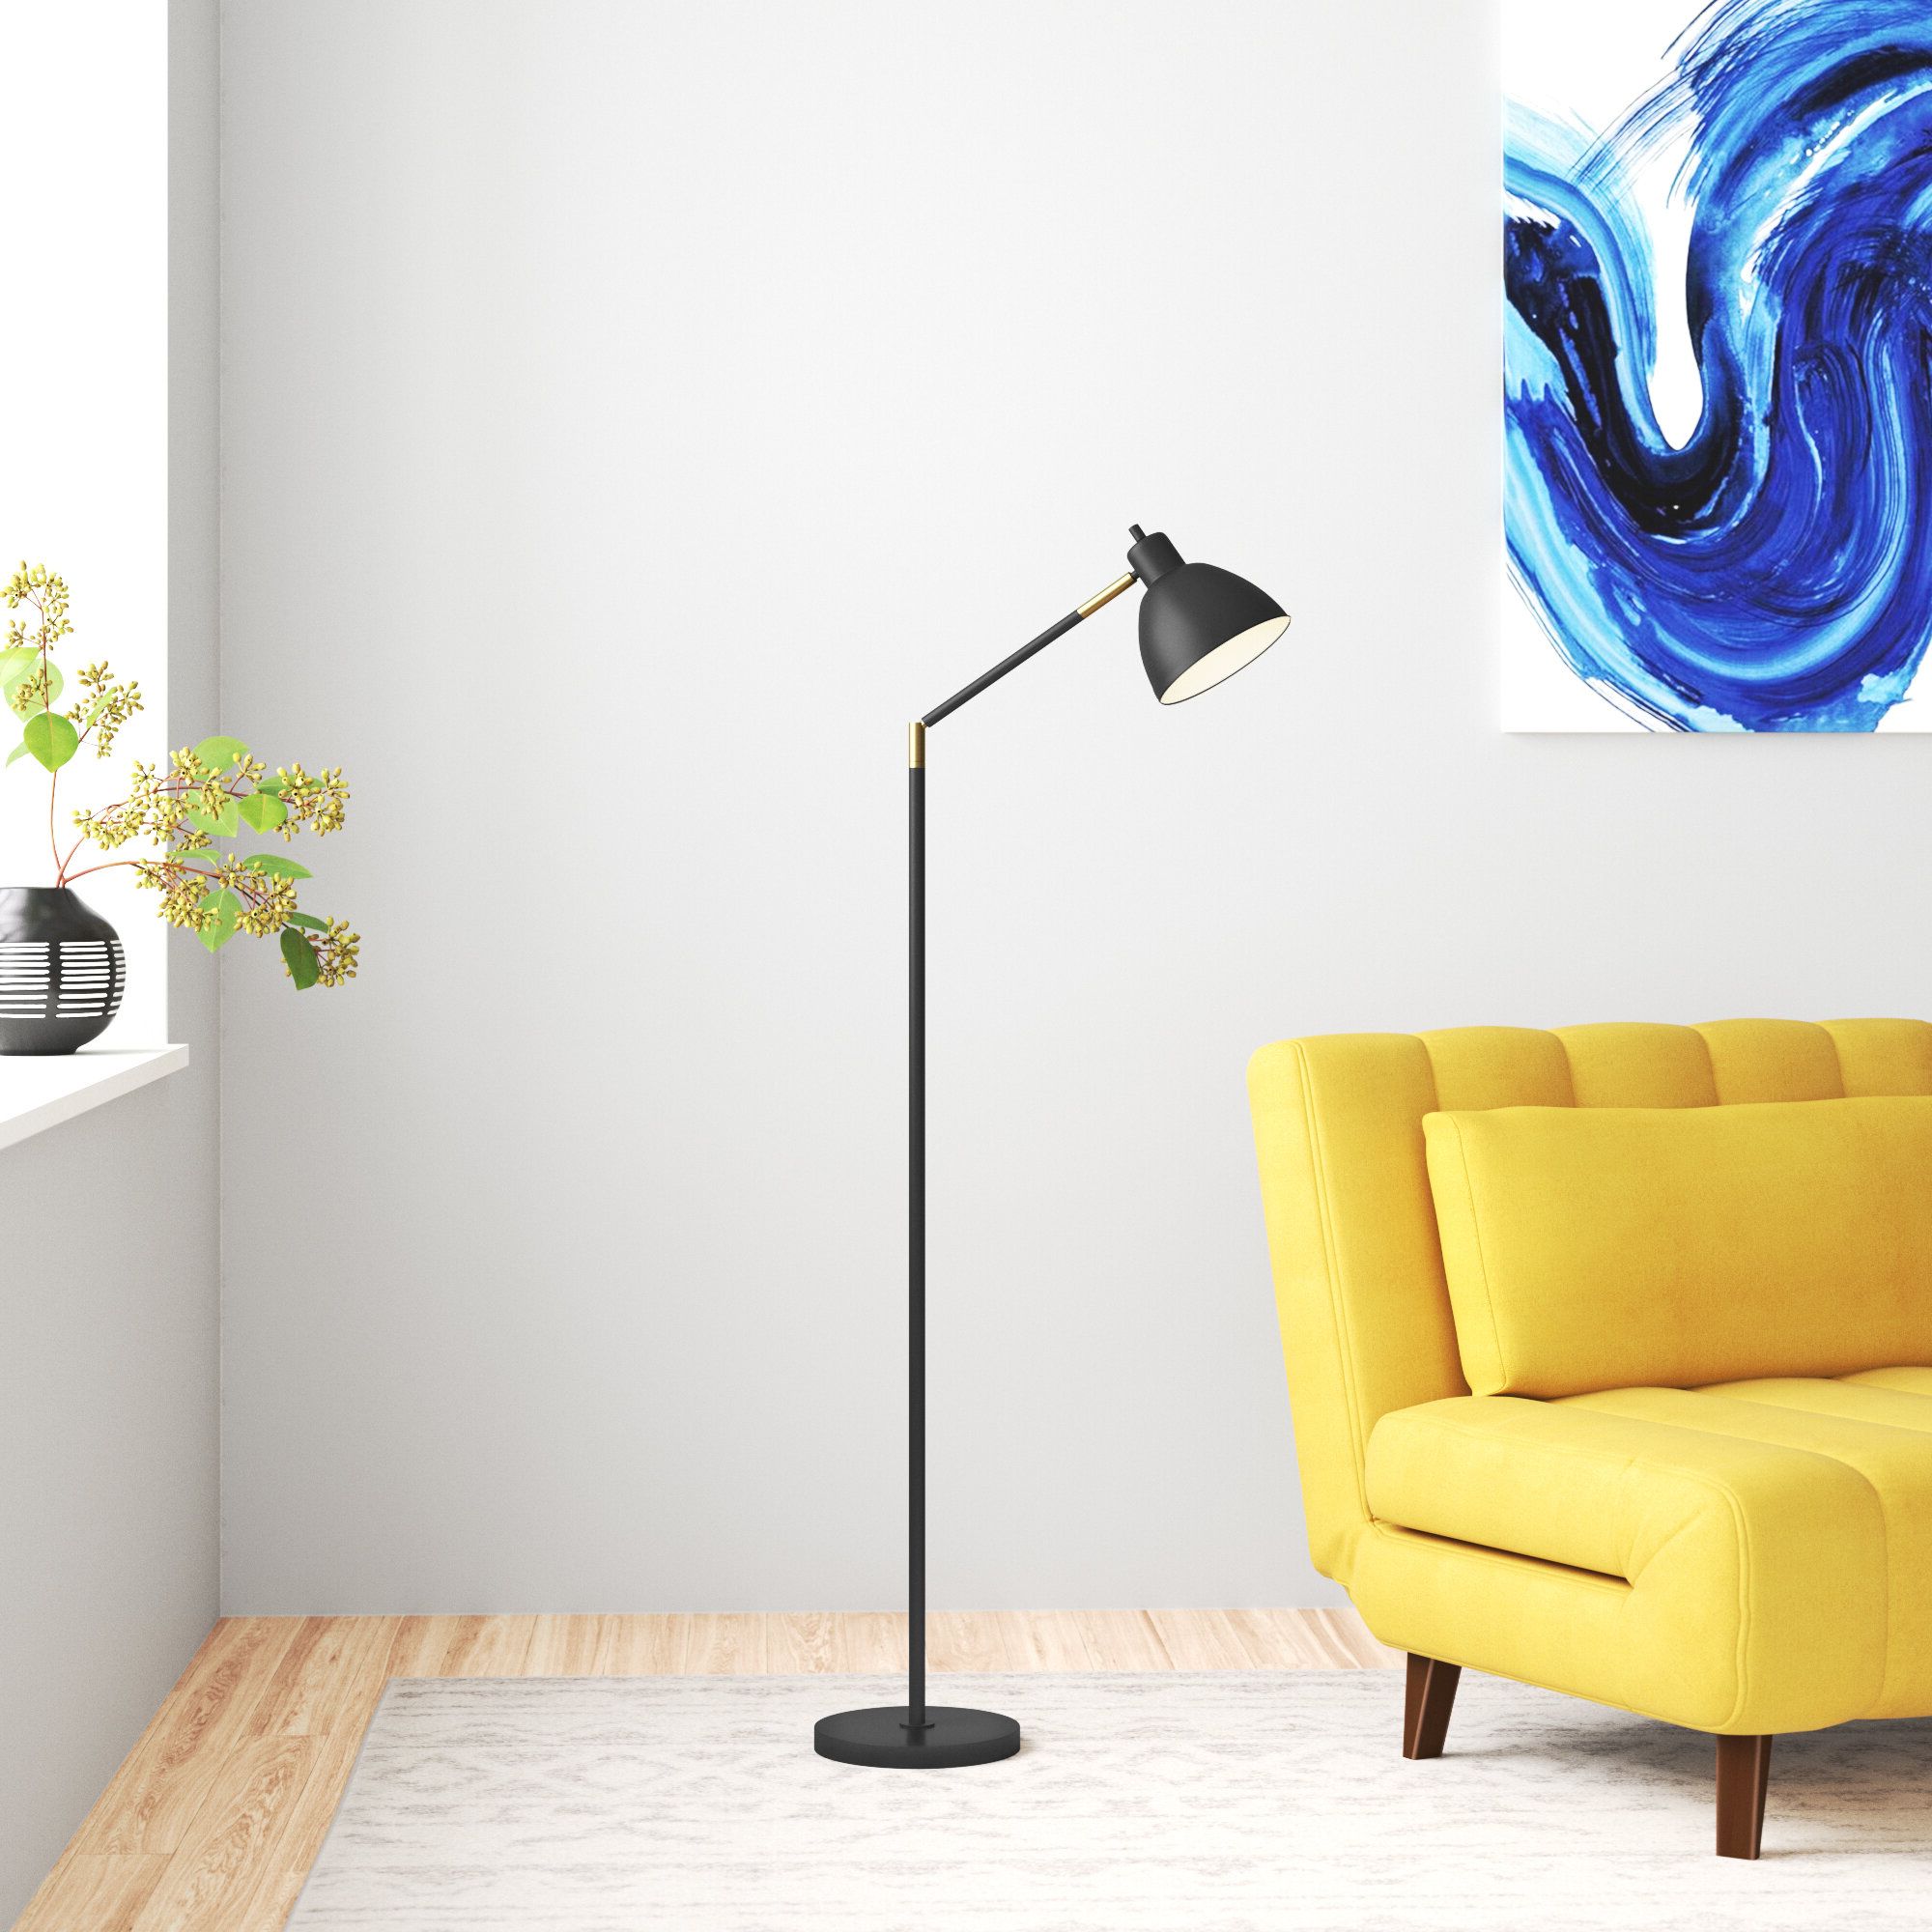 Wayfair | Floor Lamps Under $75 You'll Love In 2023 Intended For 75 Inch Floor Lamps (View 16 of 20)